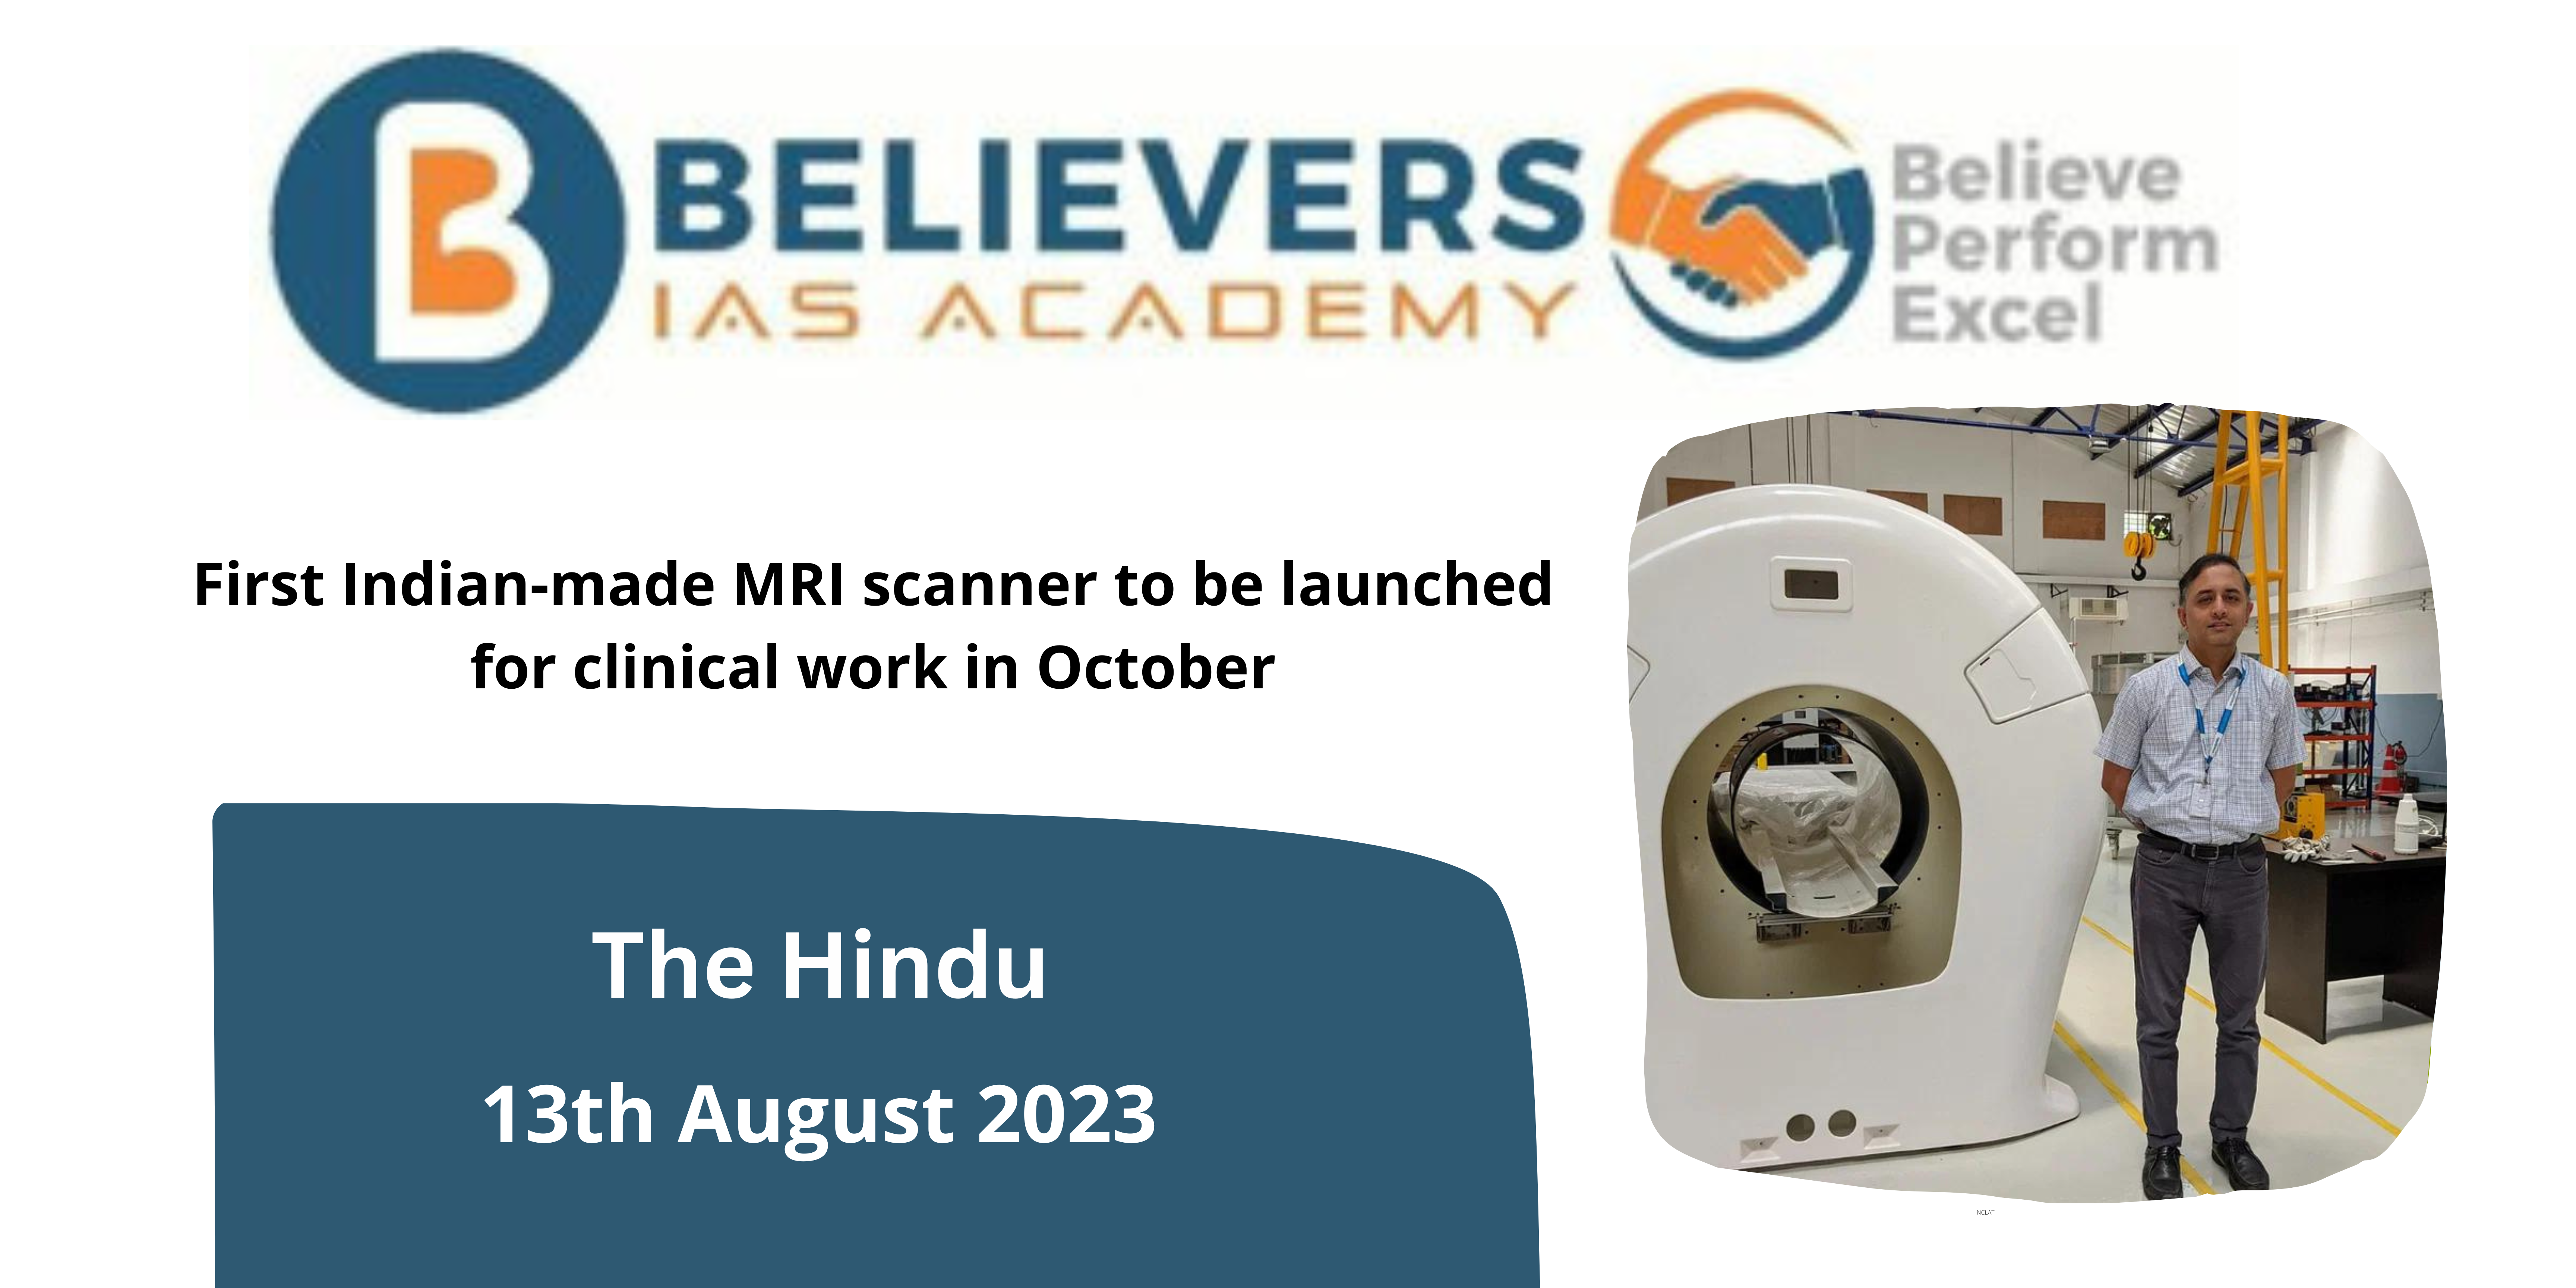 First Indian-made MRI scanner to be launched for clinical work in October